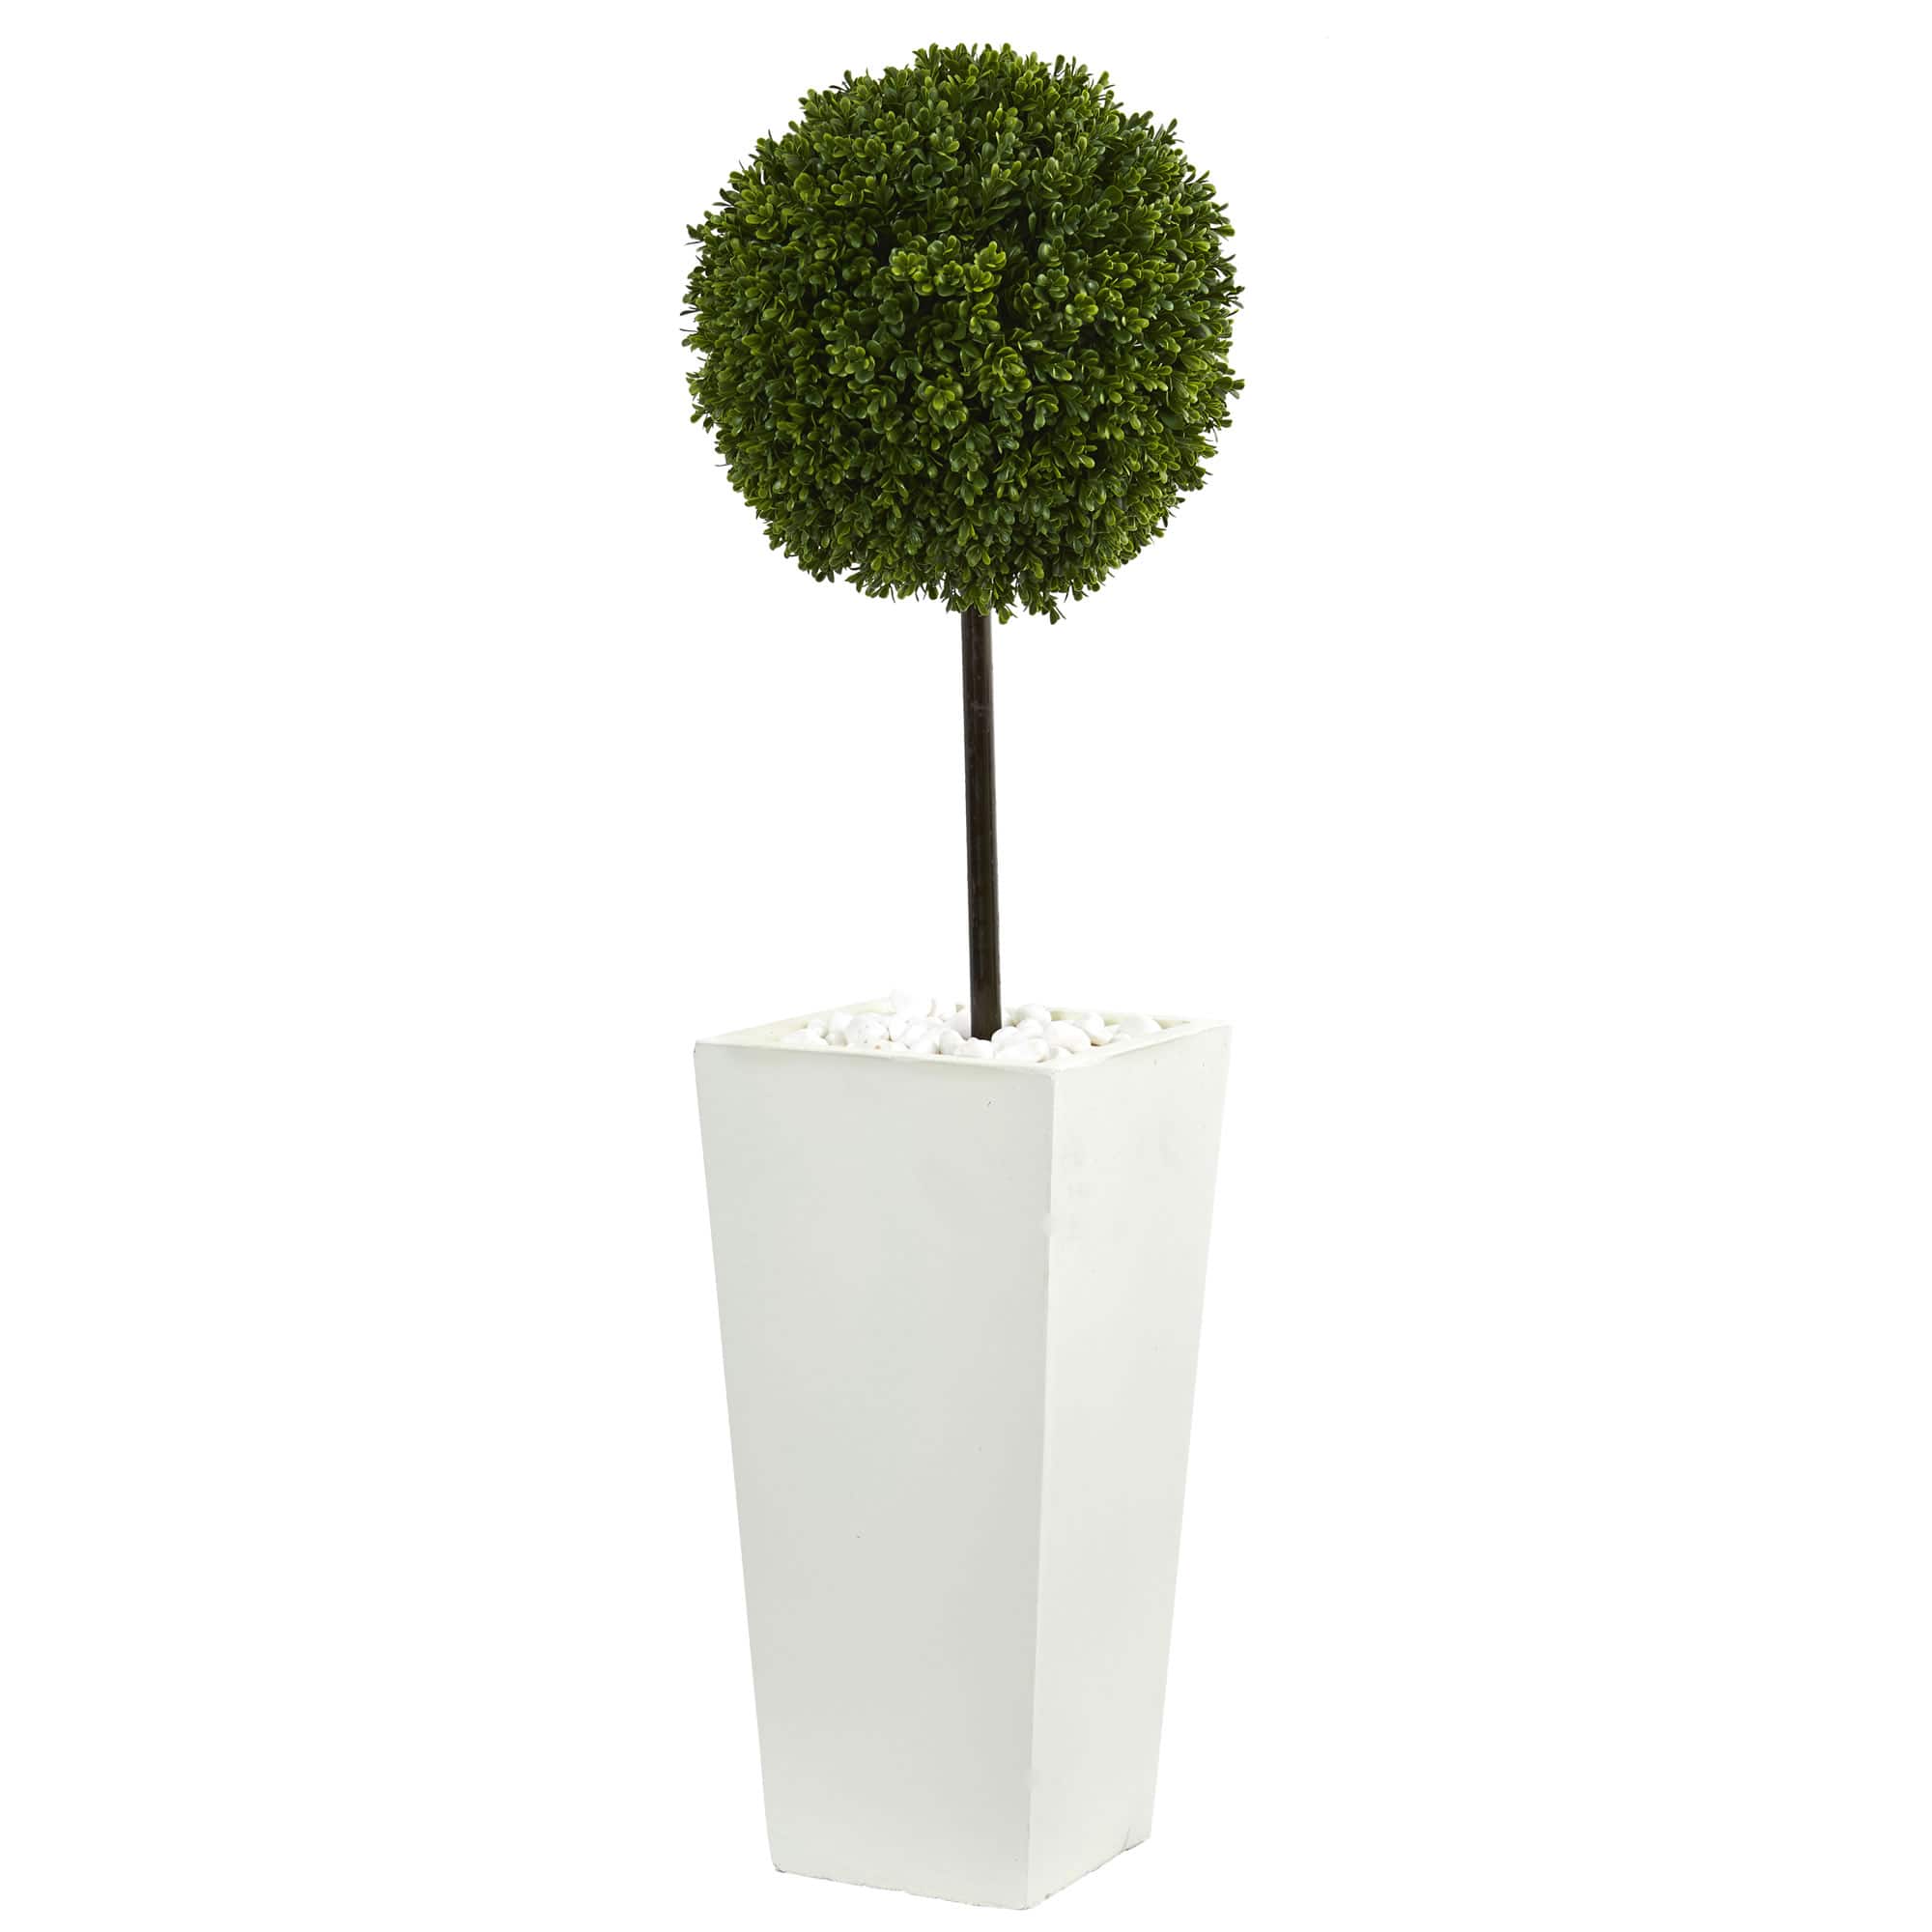 3.5ft. Boxwood Ball Topiary Tree in White Tower Planter